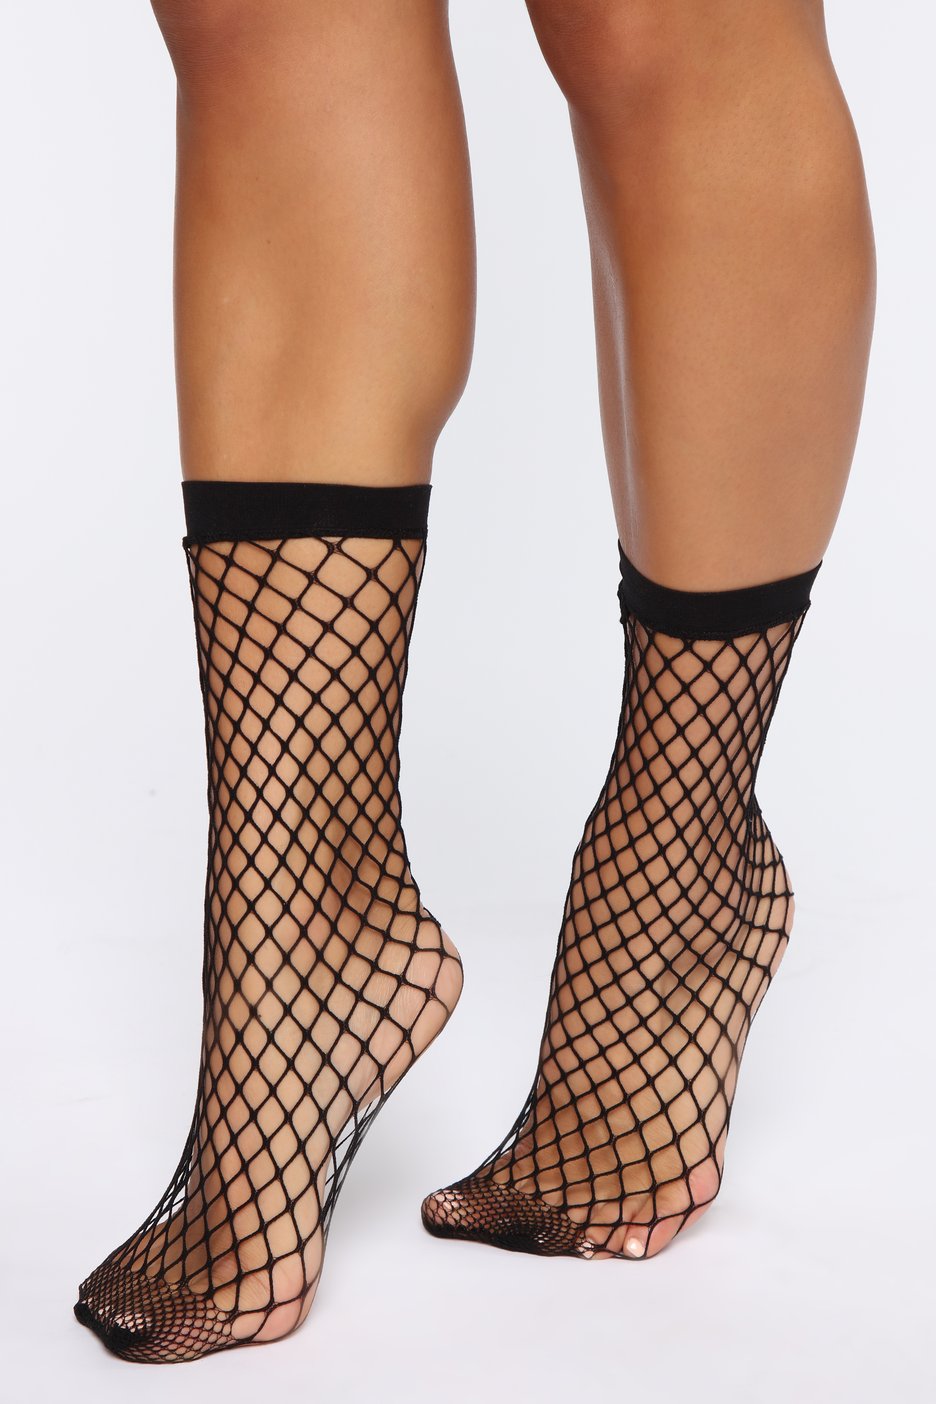 Wholesale fishnet socks To Compliment Any Outfit Or Be Discreet 